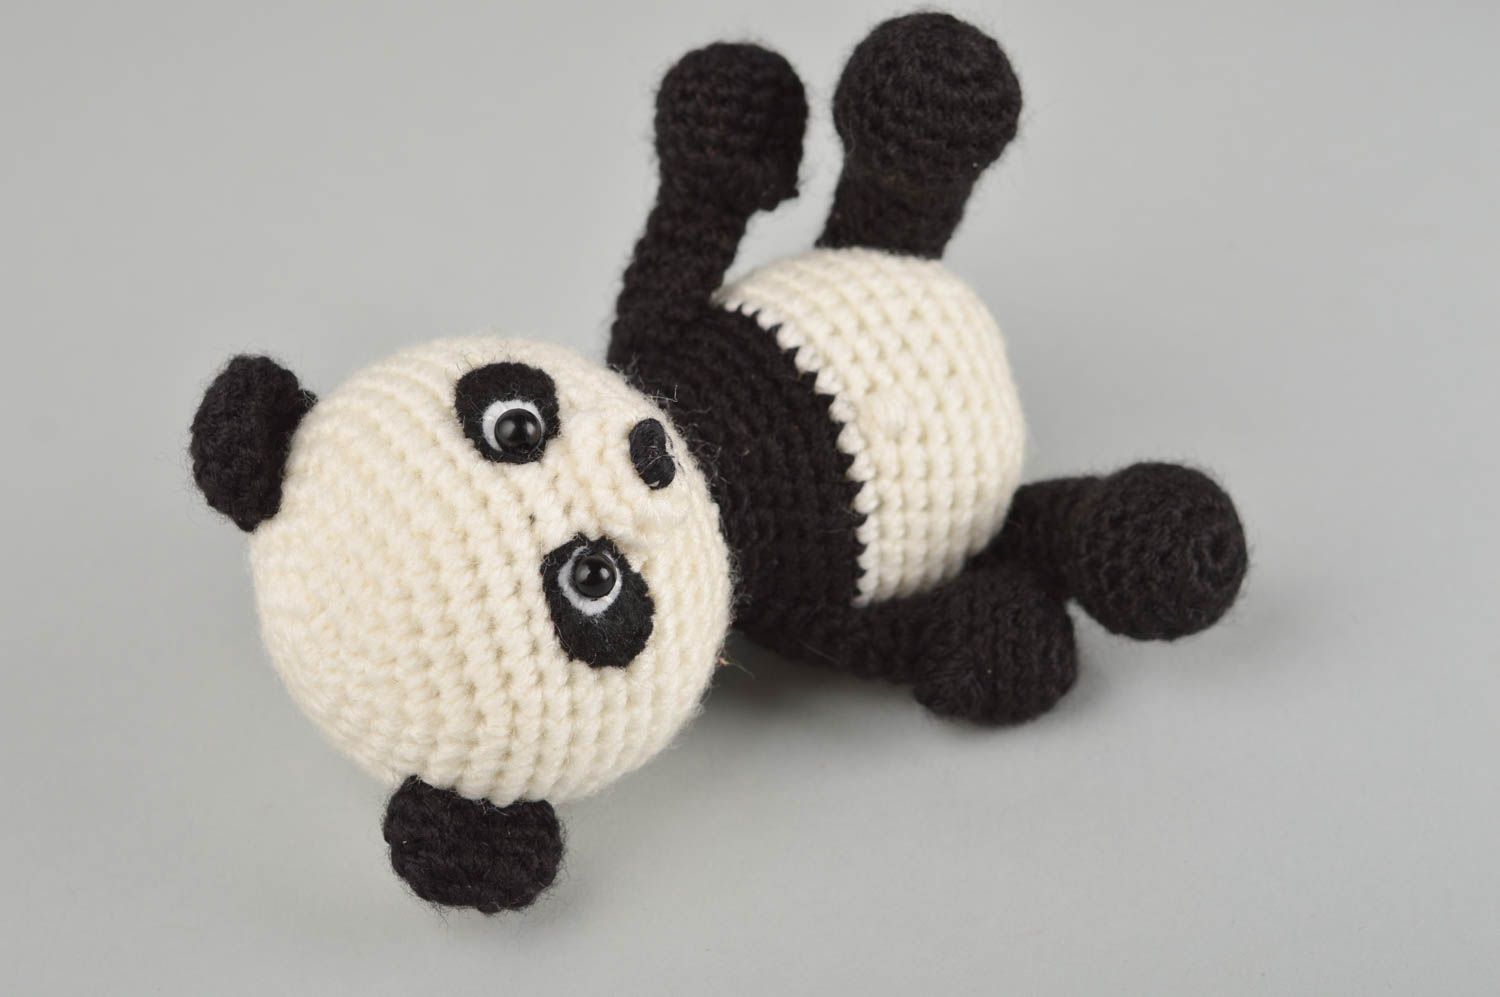 Handmade crocheted toy baby soft toy crocheted panda toy design crocheted toy   photo 5